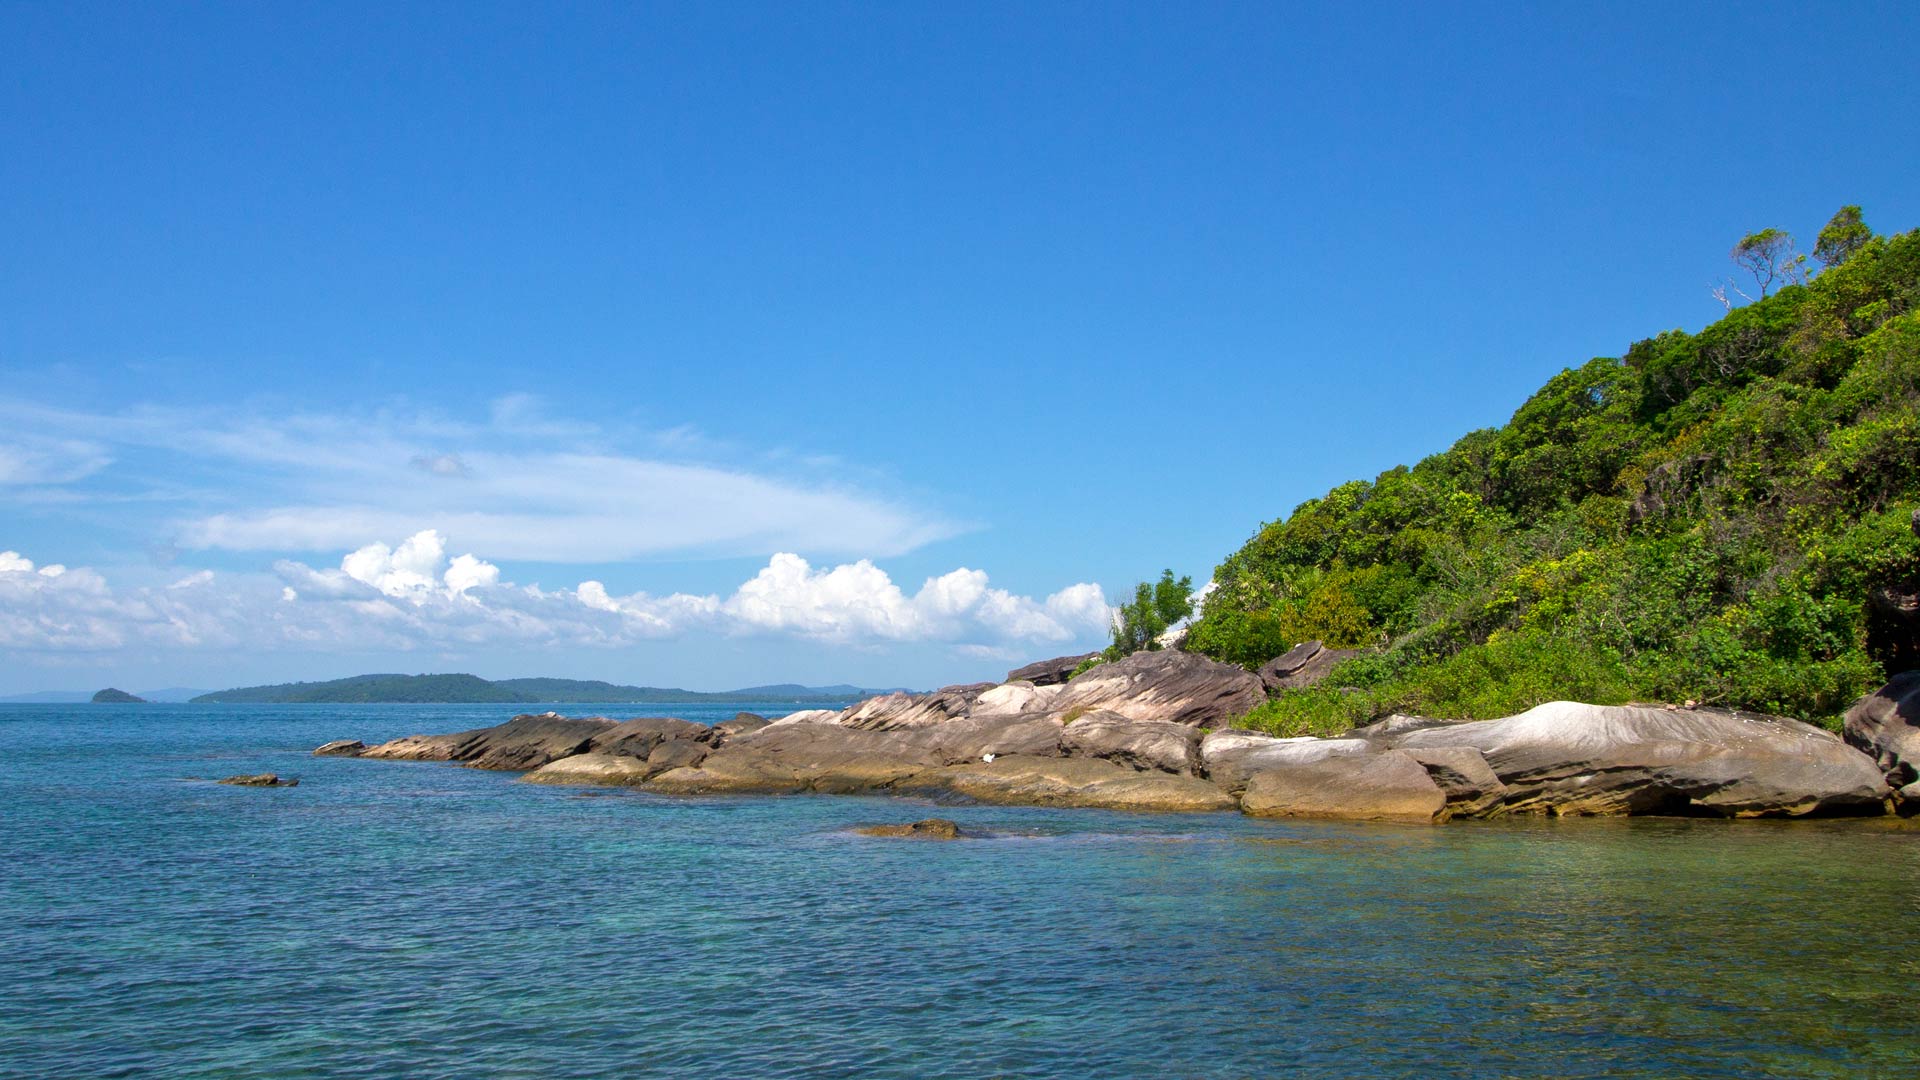 When is the Best Time to Visit Phu Quoc Island?